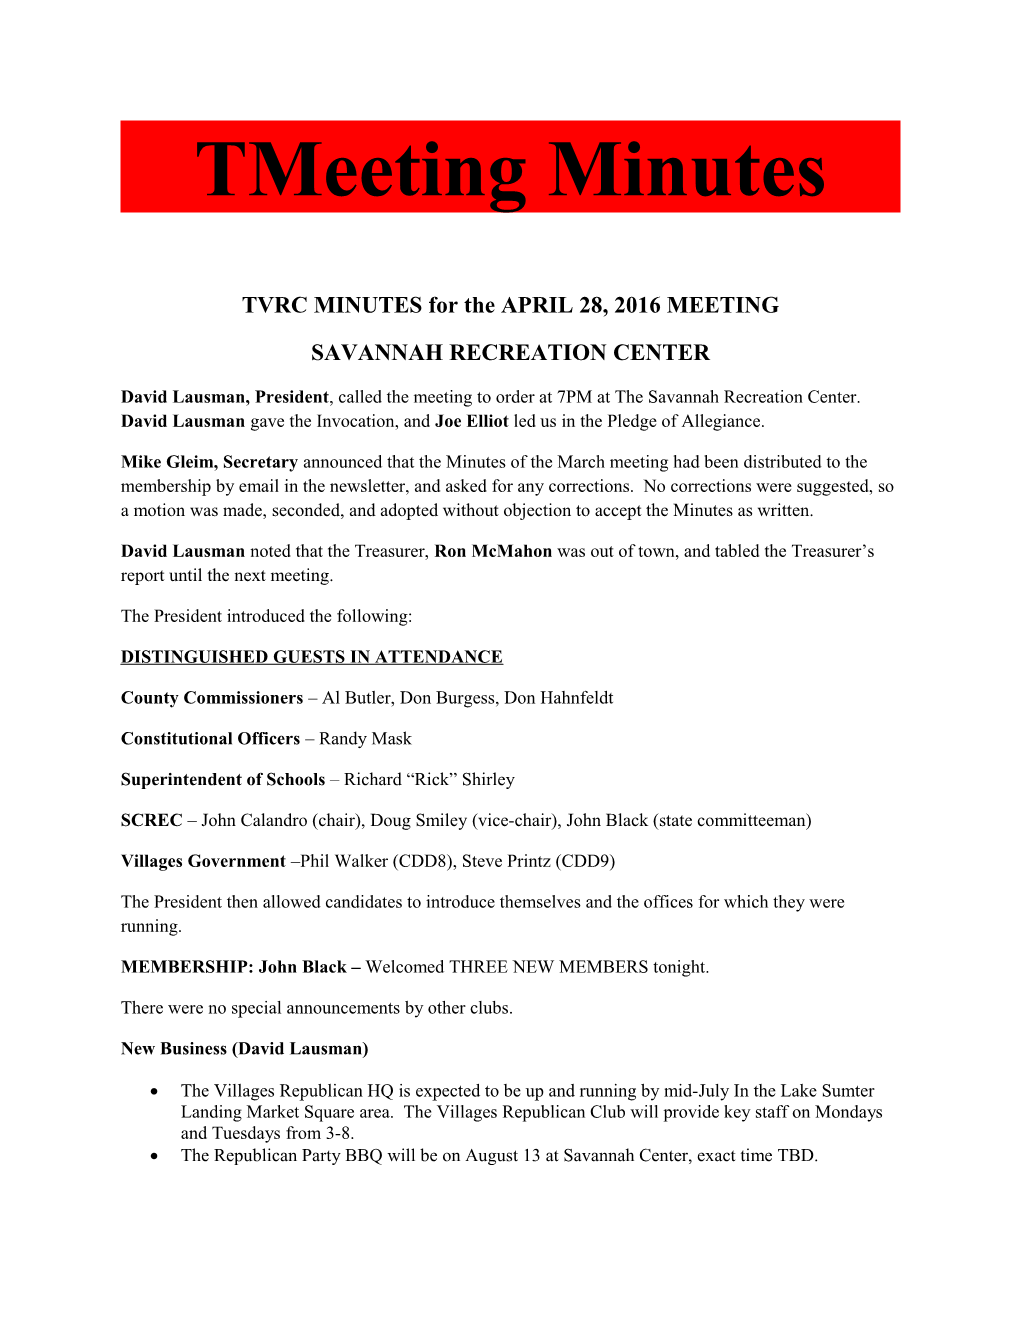 TVRC MINUTES for the APRIL 28, 2016 MEETING